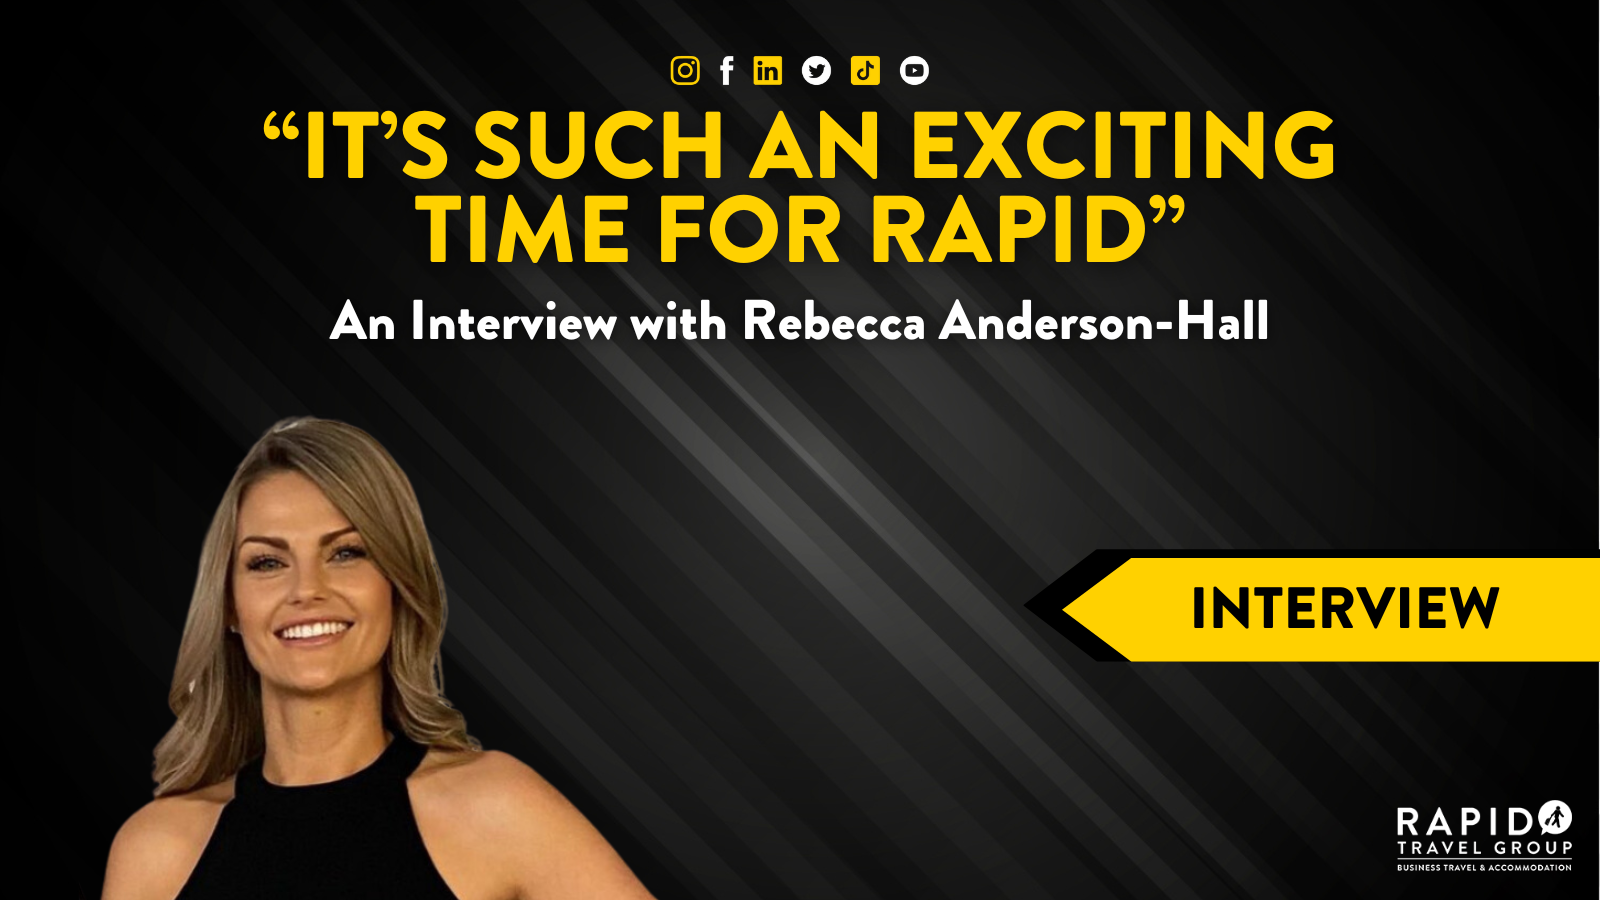 "It's such an exciting time for Rapid": An interviews with Rebecca Anderson-Hall